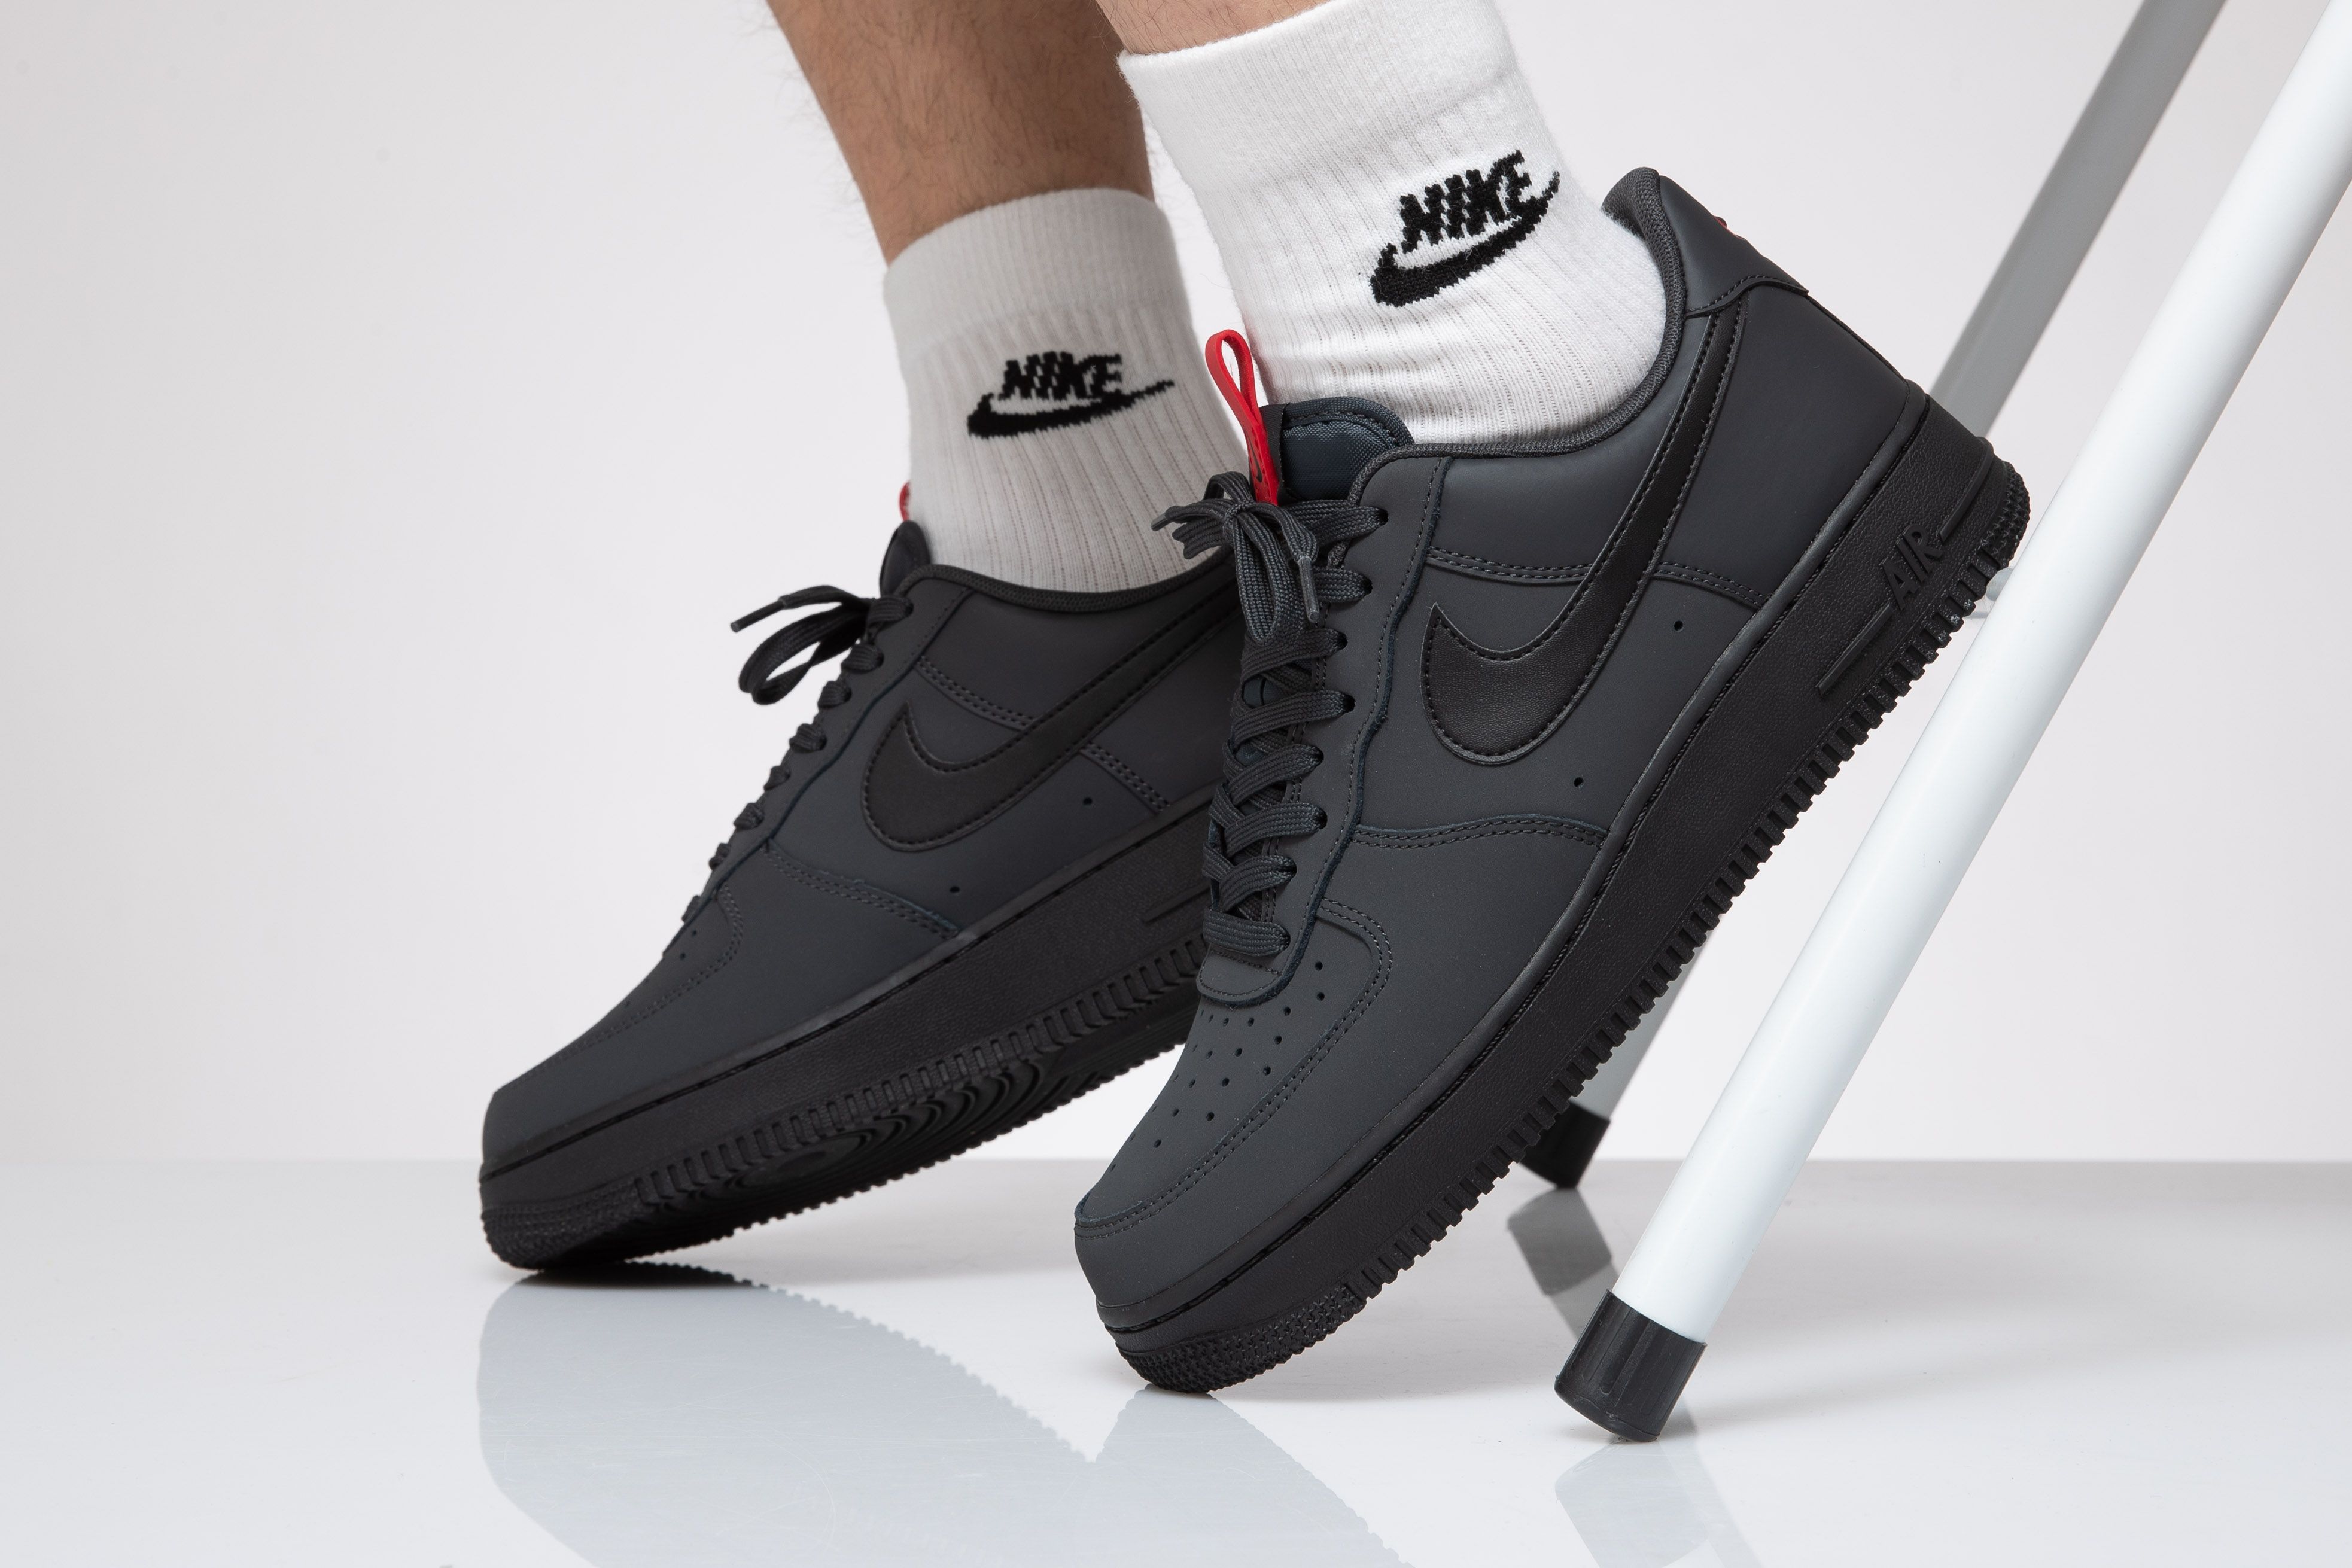 Titolo on Twitter: NOW ⚡️ Nike Air Force Low "Anthracite/Black/University Red/Black" LINK ➡️ https://t.co/9cYdoins5v US 7 - US 13 (47.5) style code 🔎 BQ4326-001 #nike #airforce1 https://t.co/IVHWdku90i" /